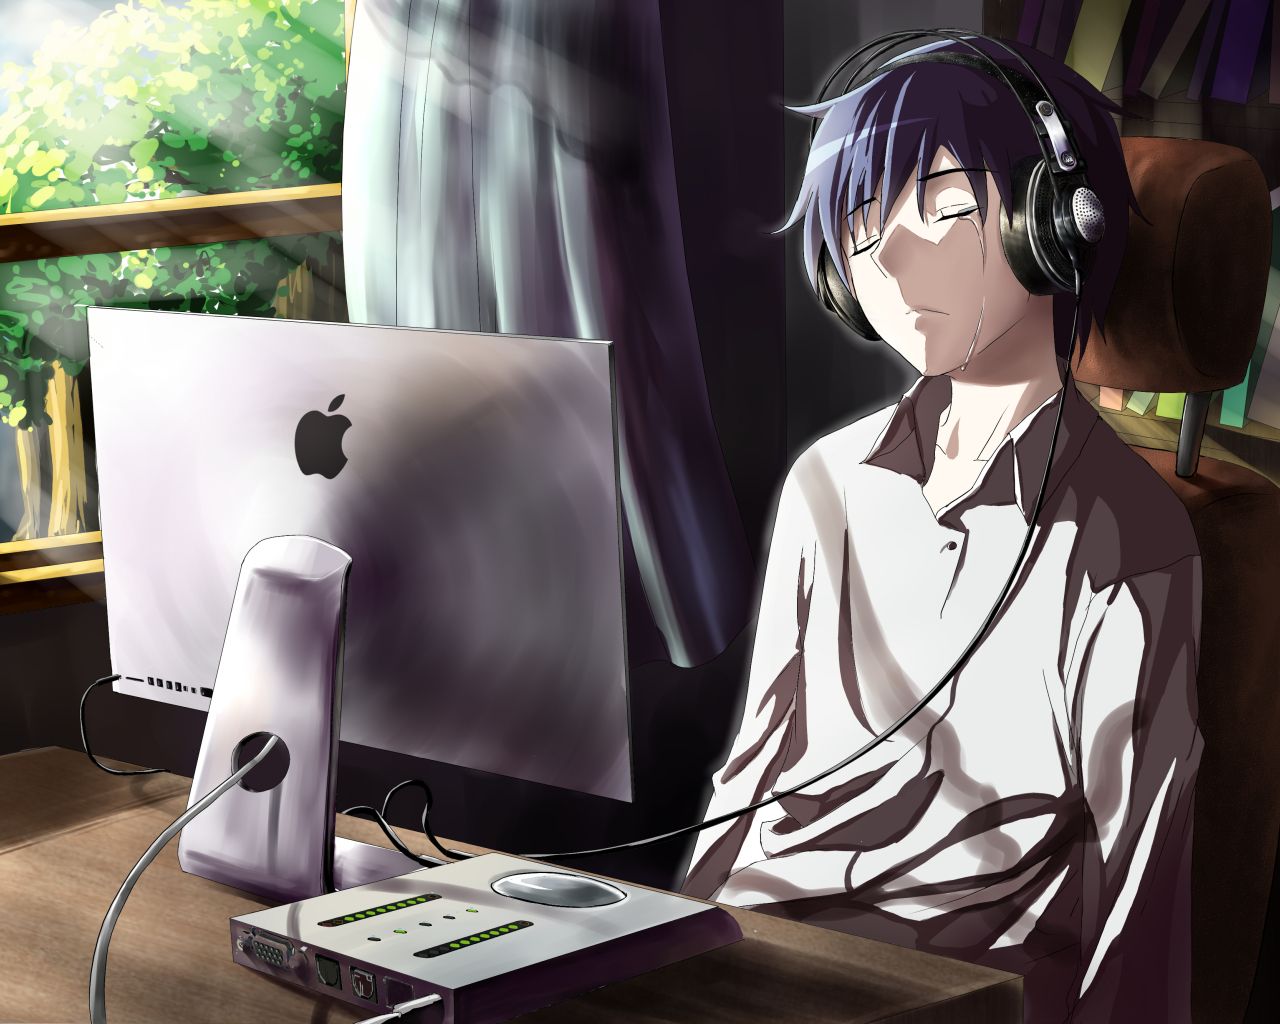 guy, anime, computer 1280x1024 Resolution Wallpaper, HD Anime 4K Wallpaper, Image, Photo and Background Den. Anime, Wallpaper, HD wallpaper